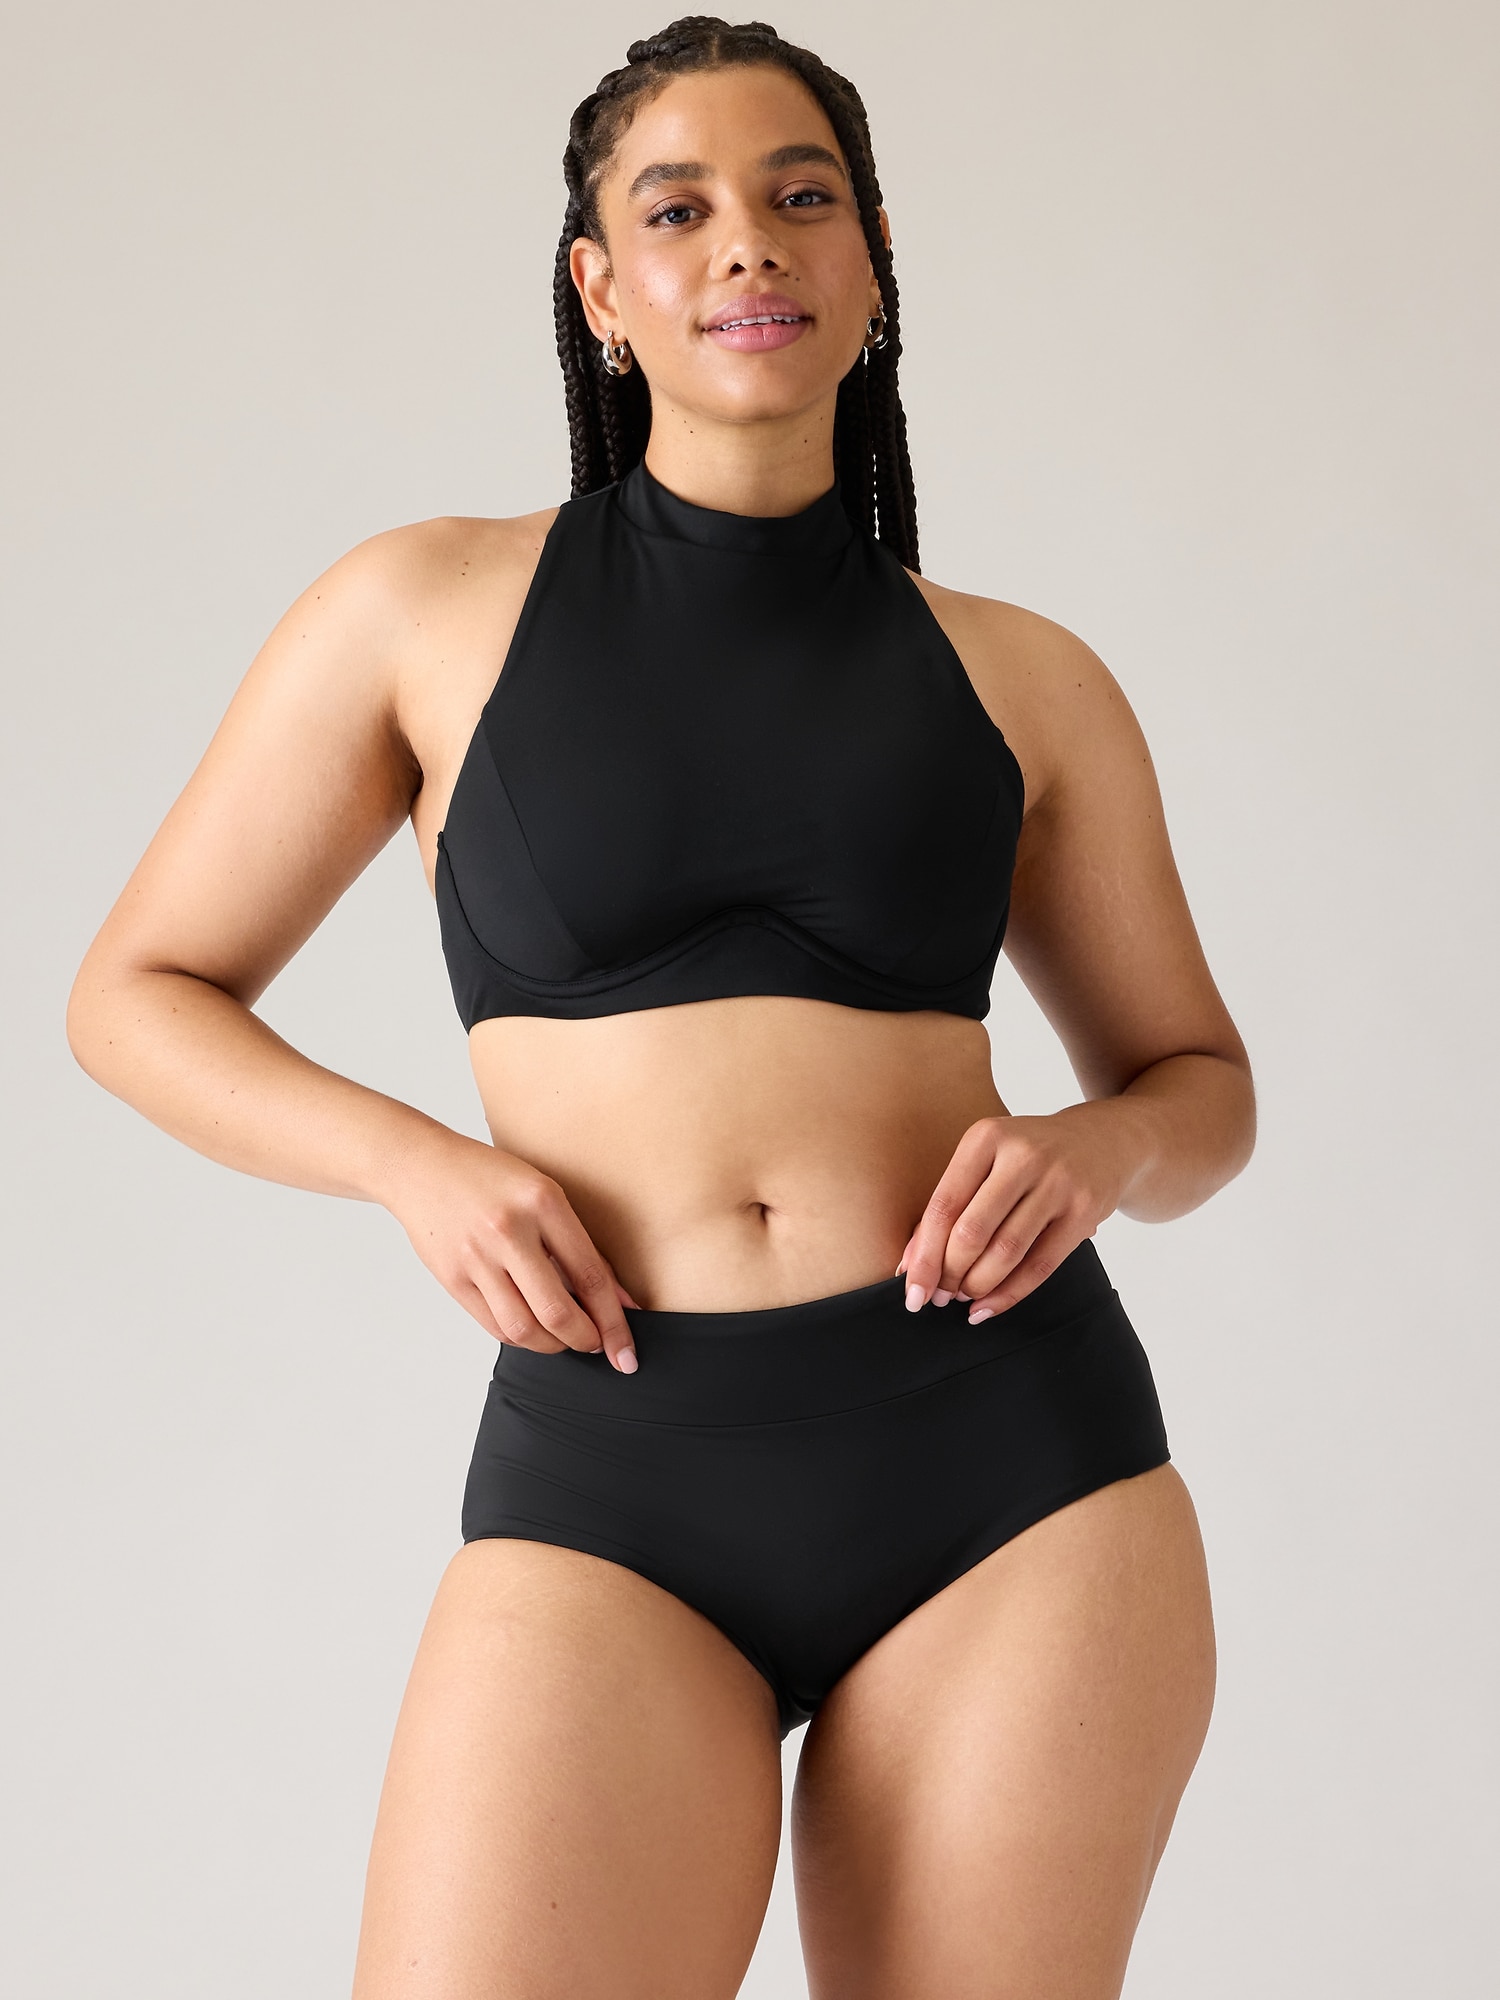 BE Active Lagos Cropped Top and High Waist Shorts, Black - Bras, Shapewear,  Activewear, Lingerie, Swimwear Online Shopping